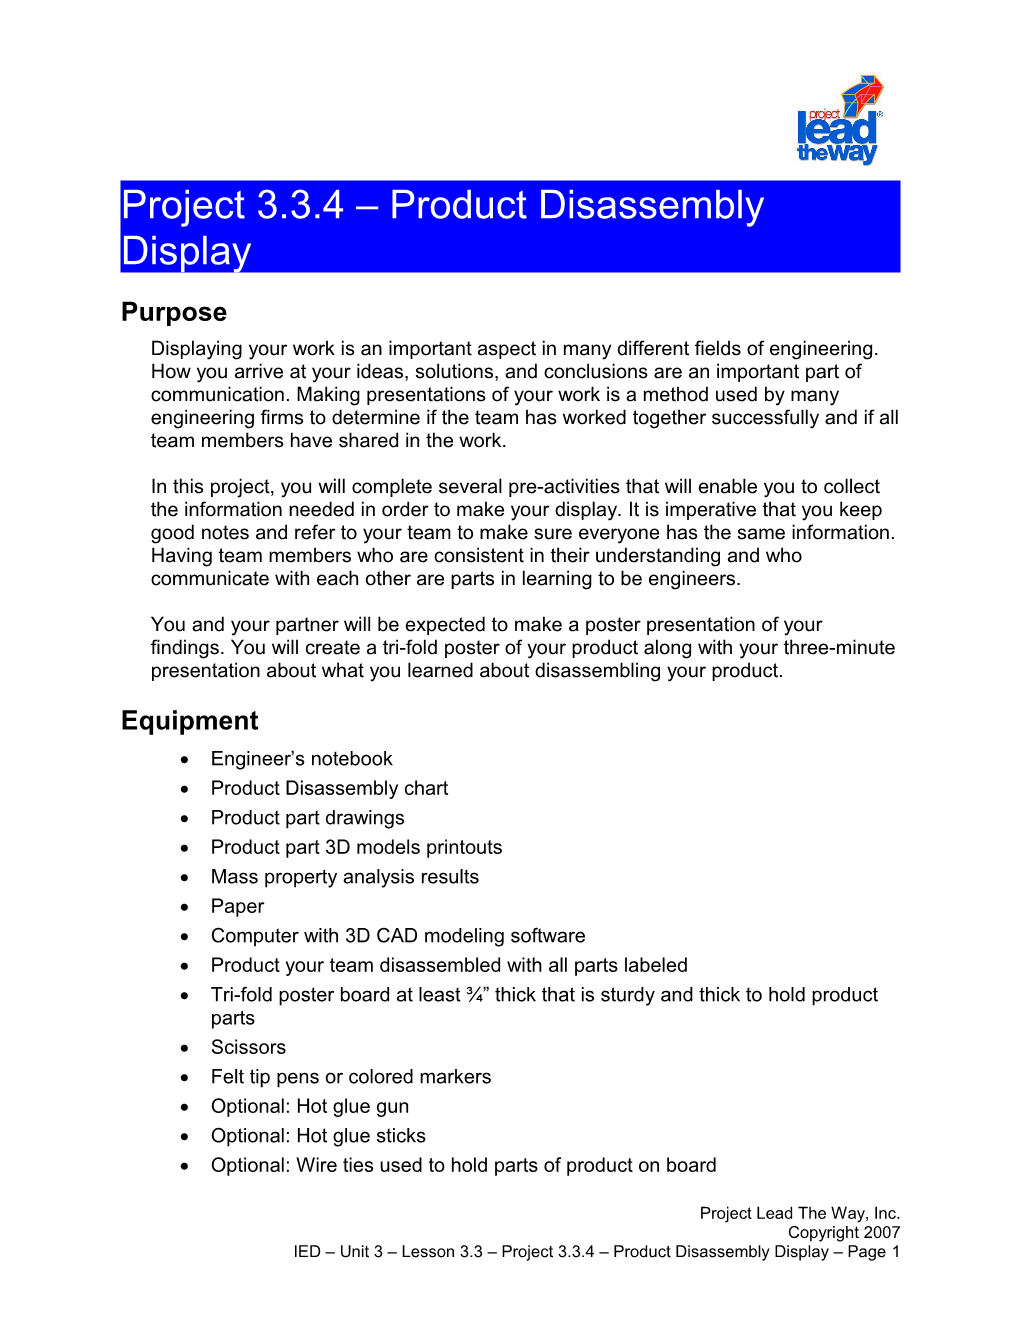 Project 3.3.4: Product Disassembly Display